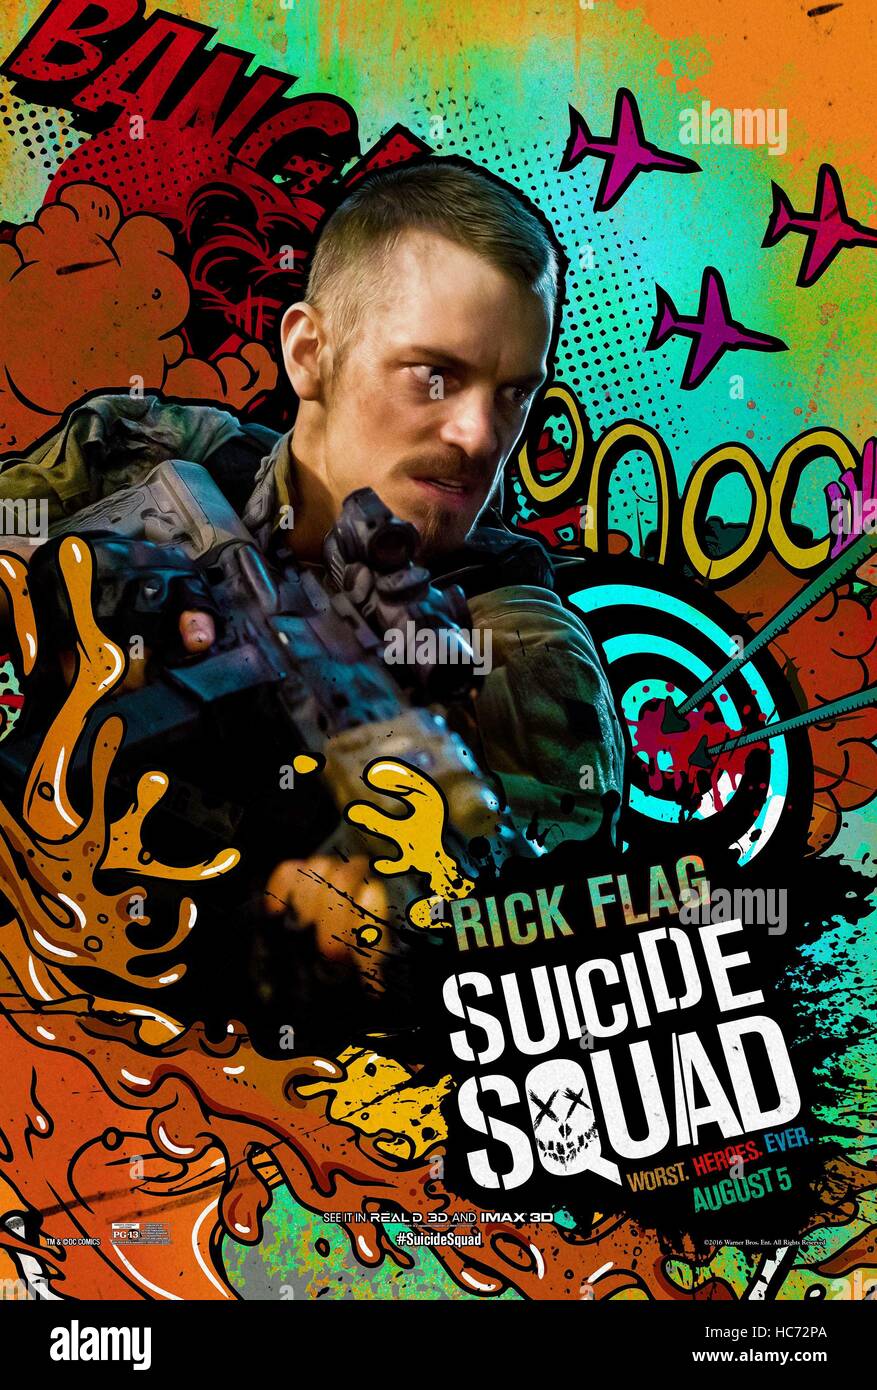 RELEASE DATE: August 5, 2016 TITLE: Suicide Squad STUDIO: Atlas Entertainment DIRECTOR: David Ayer PLOT: A secret government agency recruits imprisoned supervillains to execute dangerous black ops missions in exchange for clemency STARRING: Joel Kinnaman as Rick Flagg poster (Credit Image: c Atlas Entertainment/Entertainment Pictures/) Stock Photo